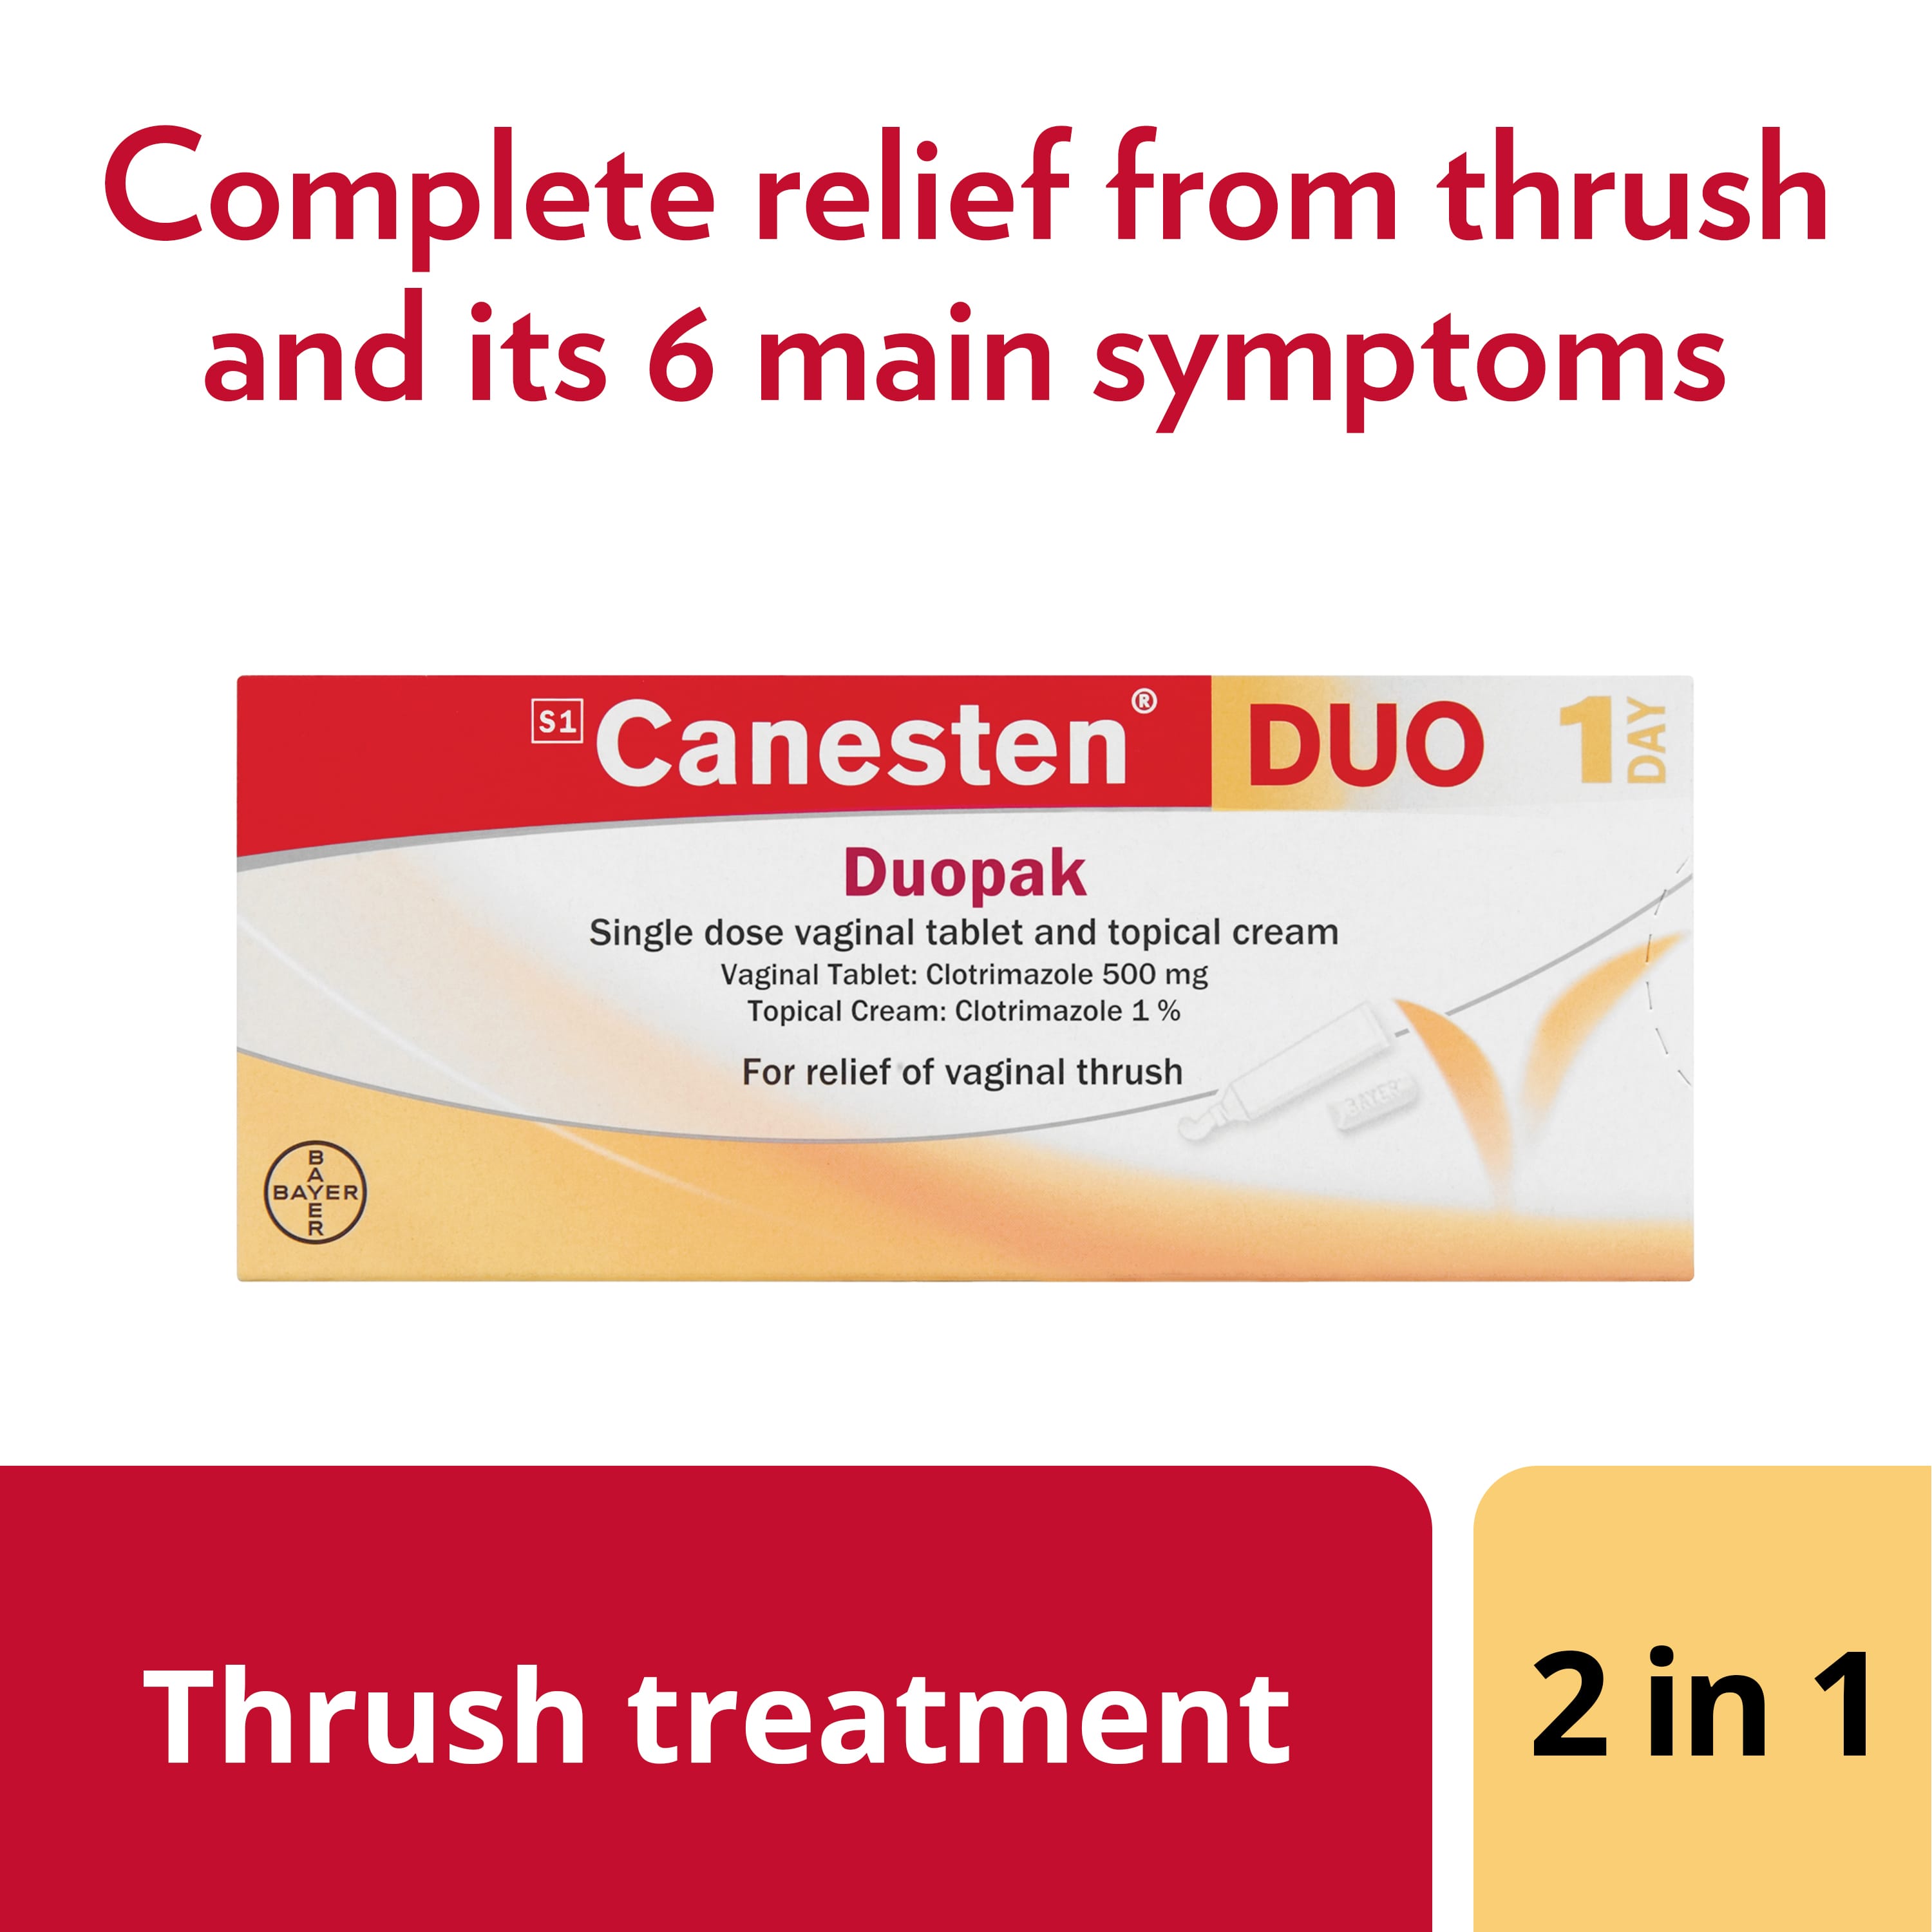 Thrush treatment 2 in 1: Canesten Thrush Combi Vaginal Tablet and External Cream, with caption on top: Complete relief from thrush and its 6 main symptoms